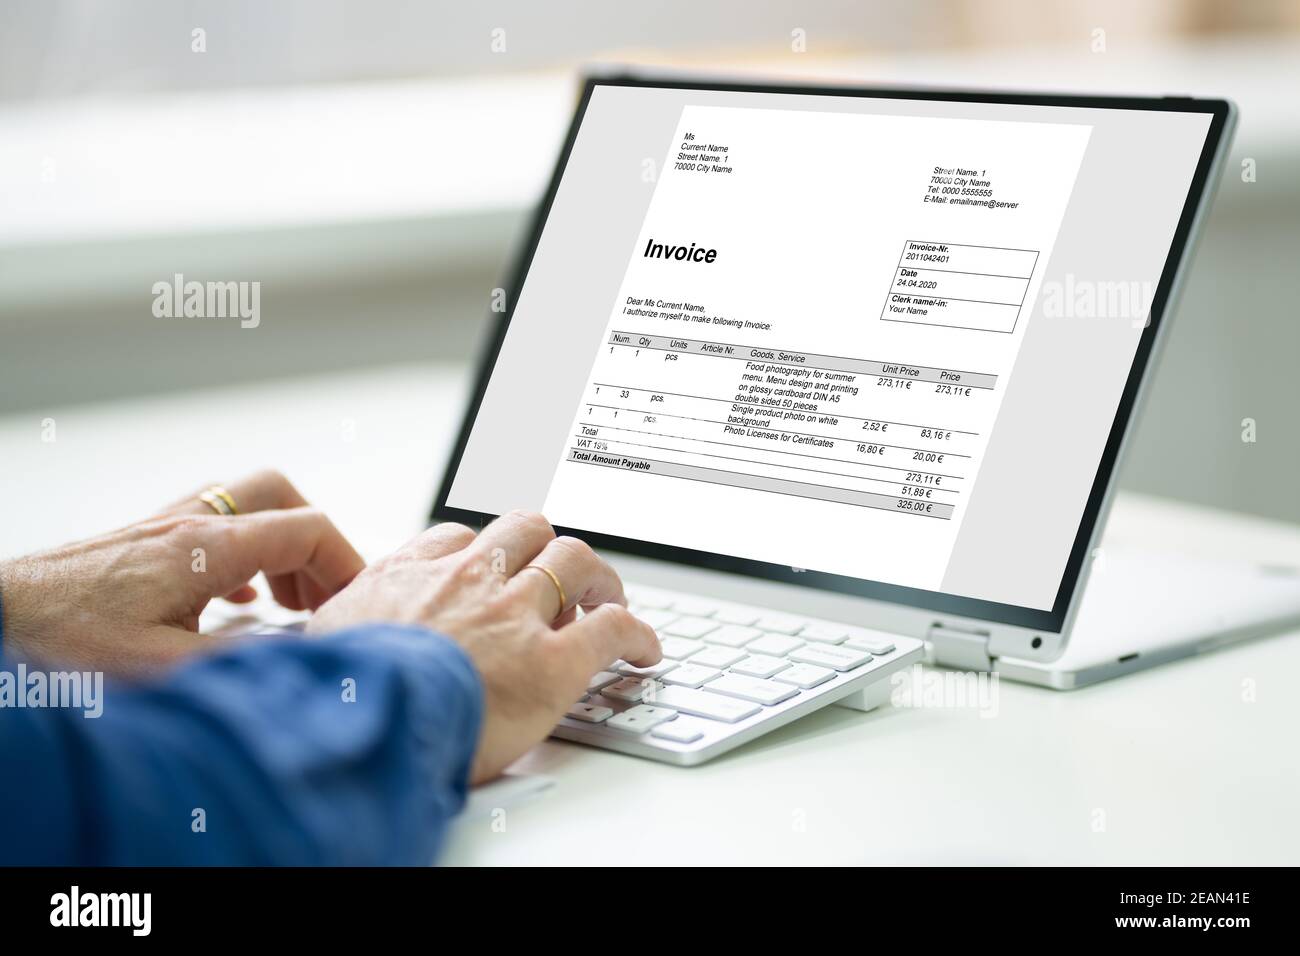 Digital Invoice Business Bill Payment Stock Photo